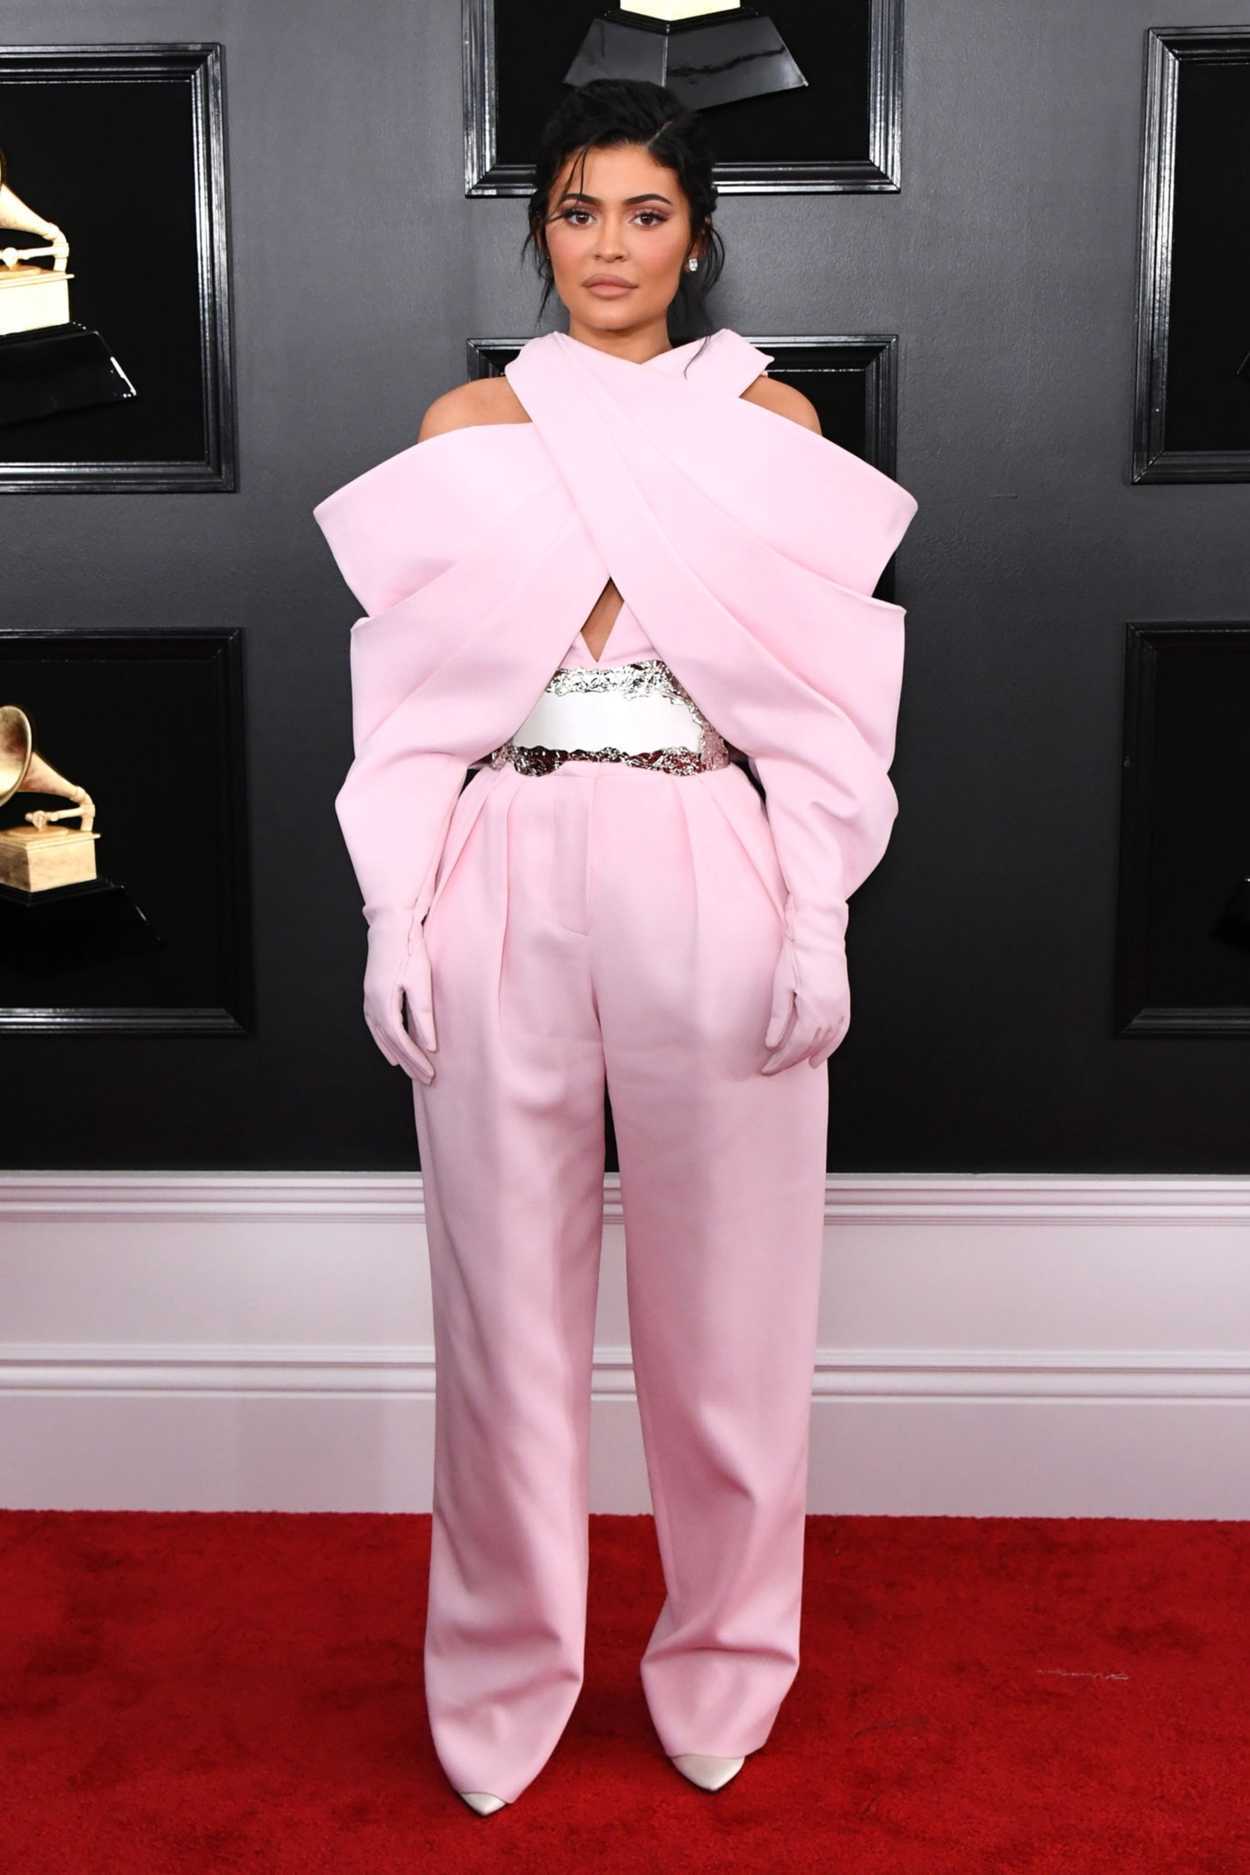 Kylie Jenner Attends the 61st Annual Grammy Awards 2019 at the Staples Center in Los ...